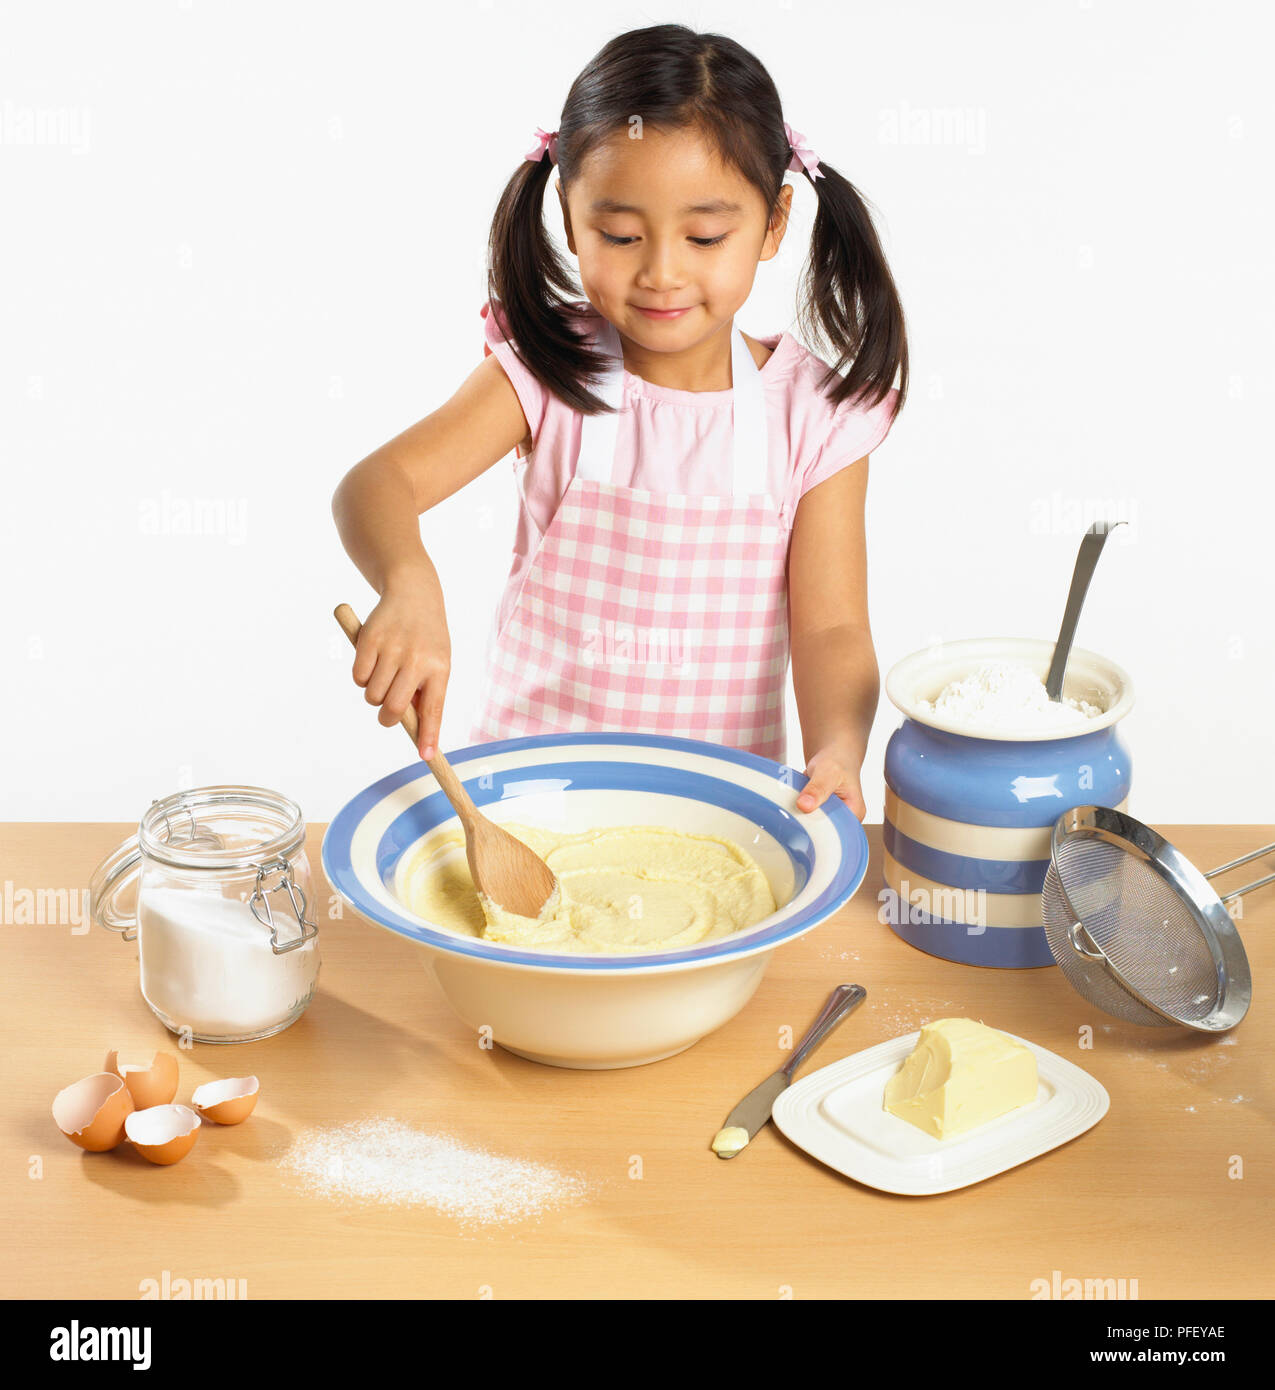 Girl Stirring Mixture In Bowl With Wooden Spoon Stock Photo Alamy